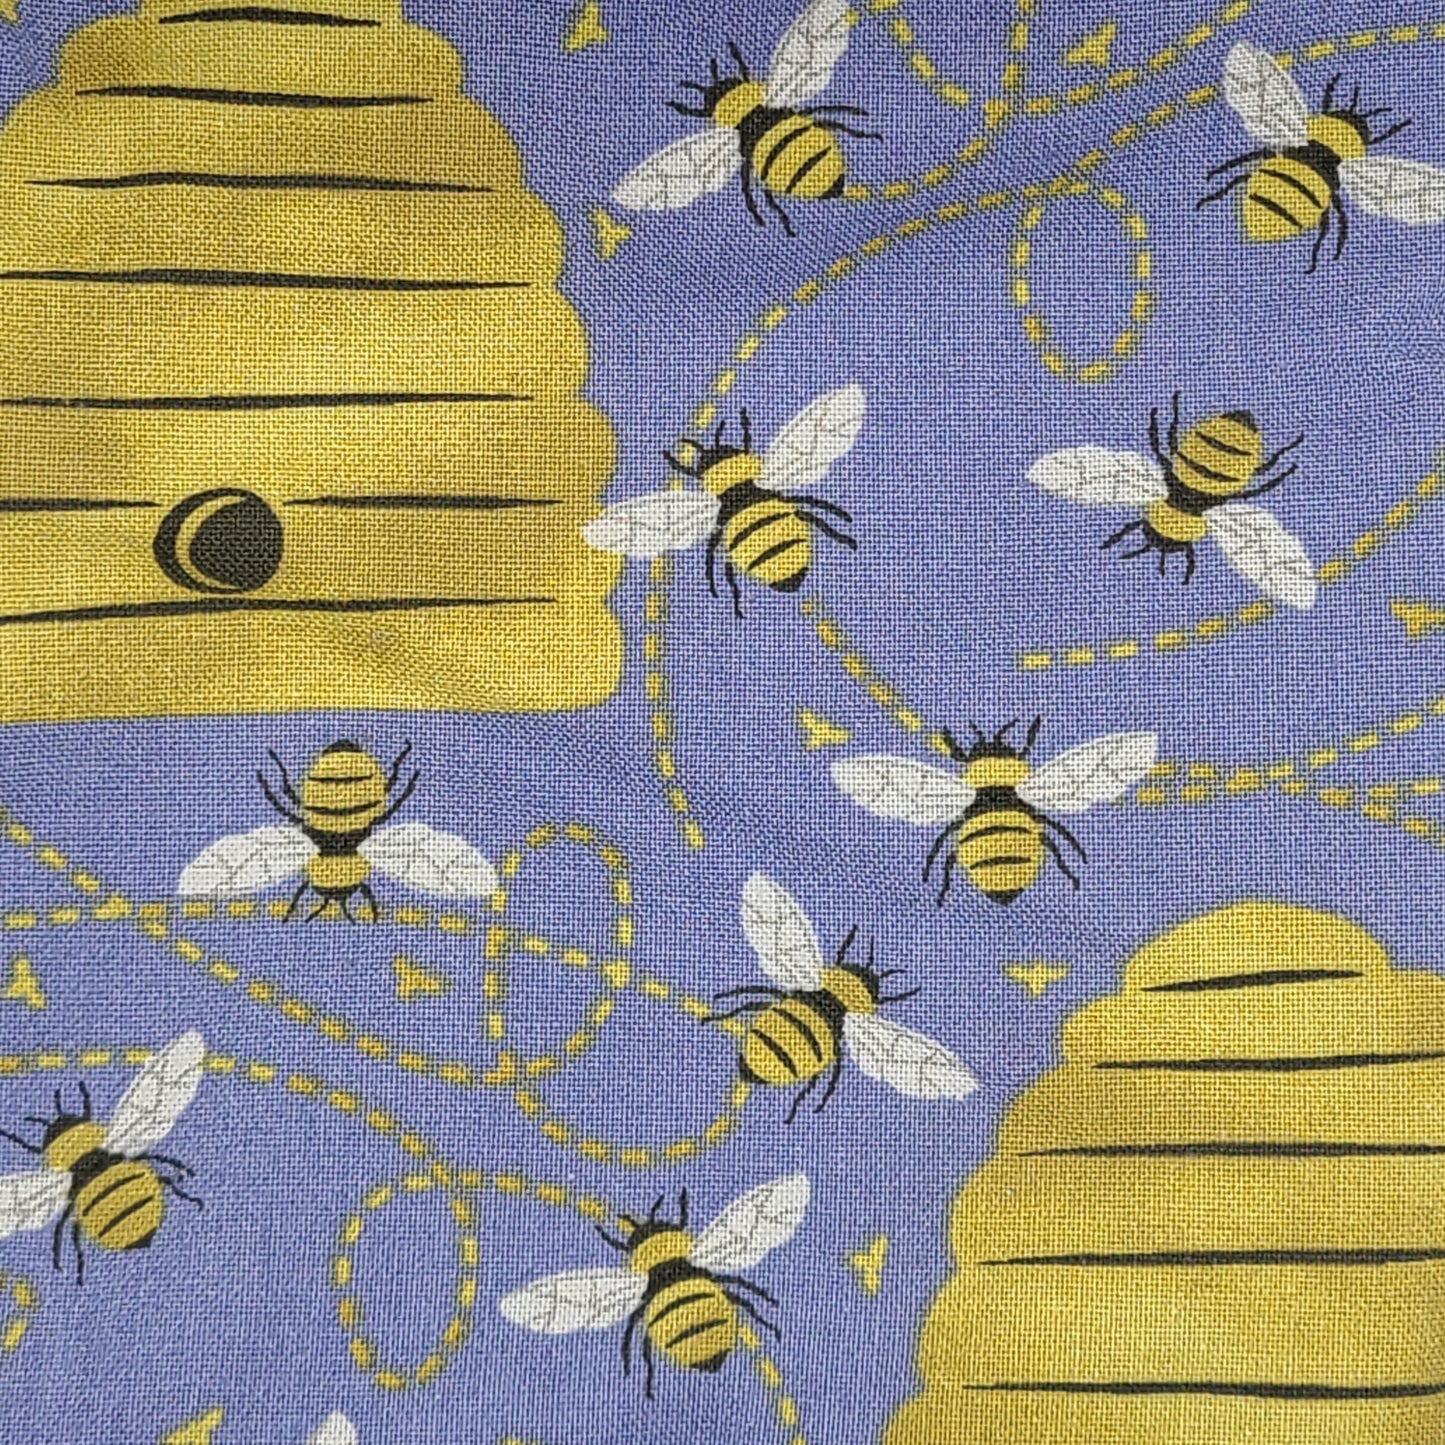 "Bees in the Beehive" Rice Bag